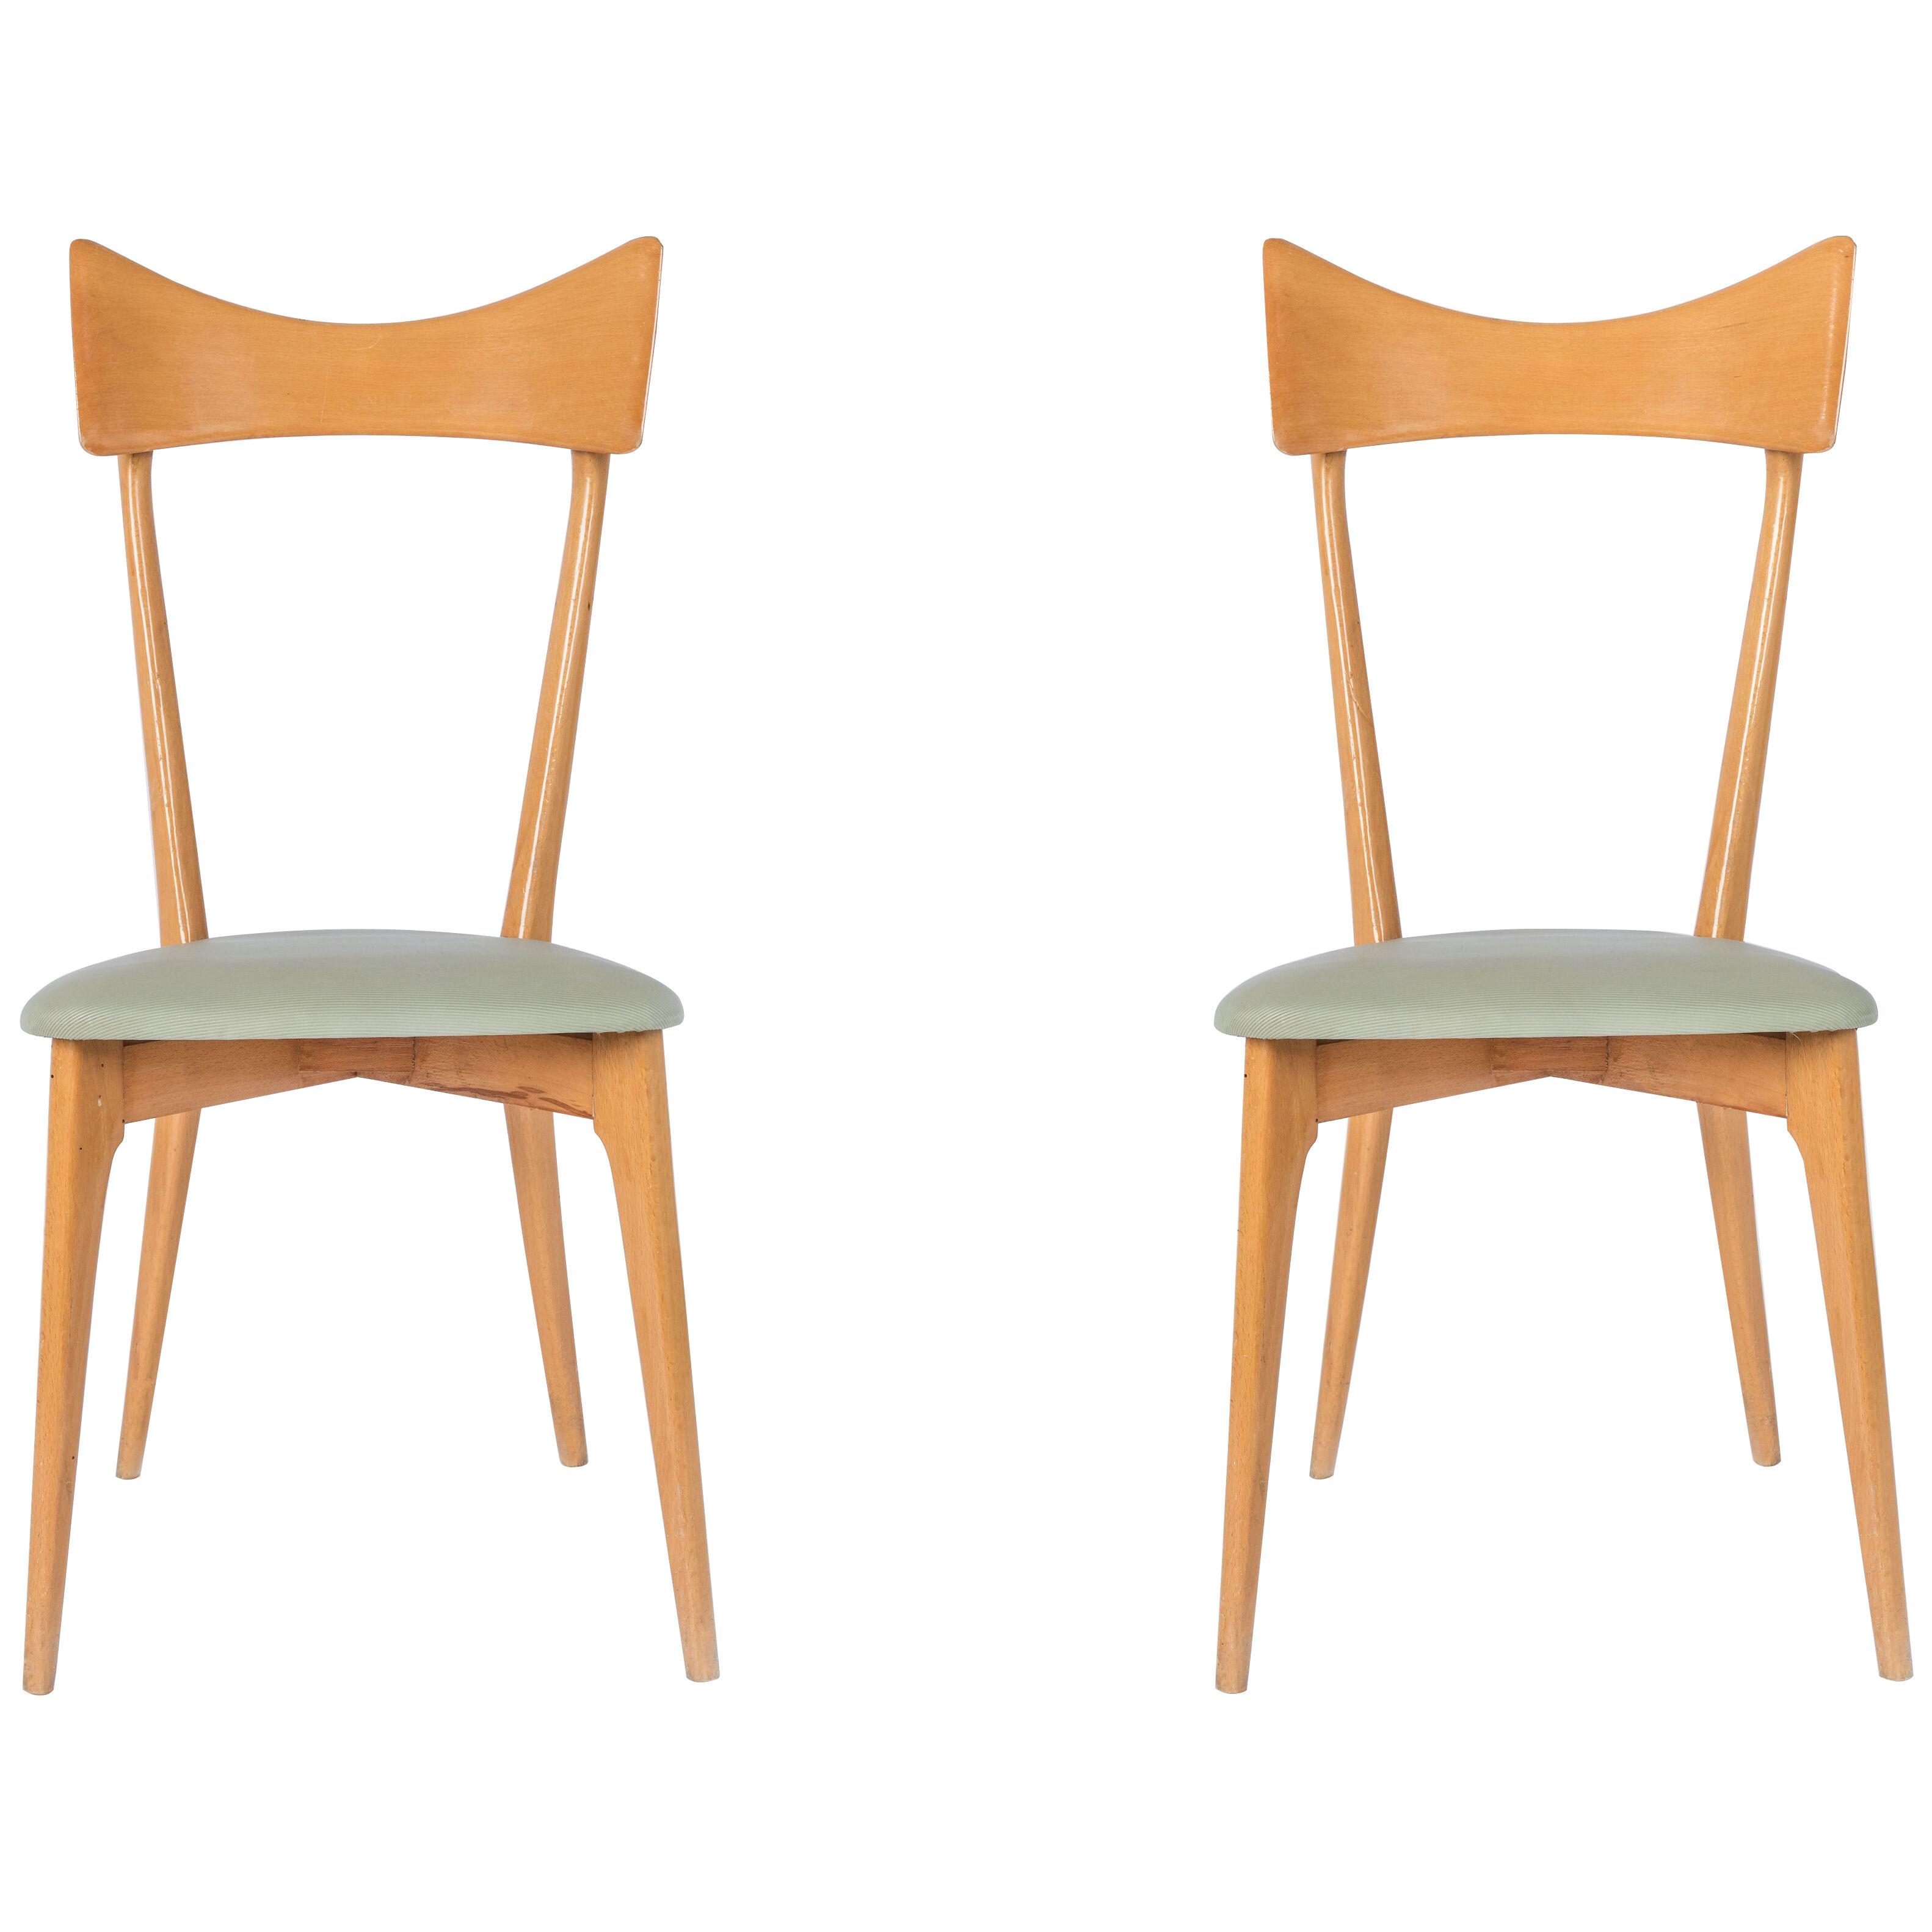 Set of six mid-century designed chairs by Ico Parisi